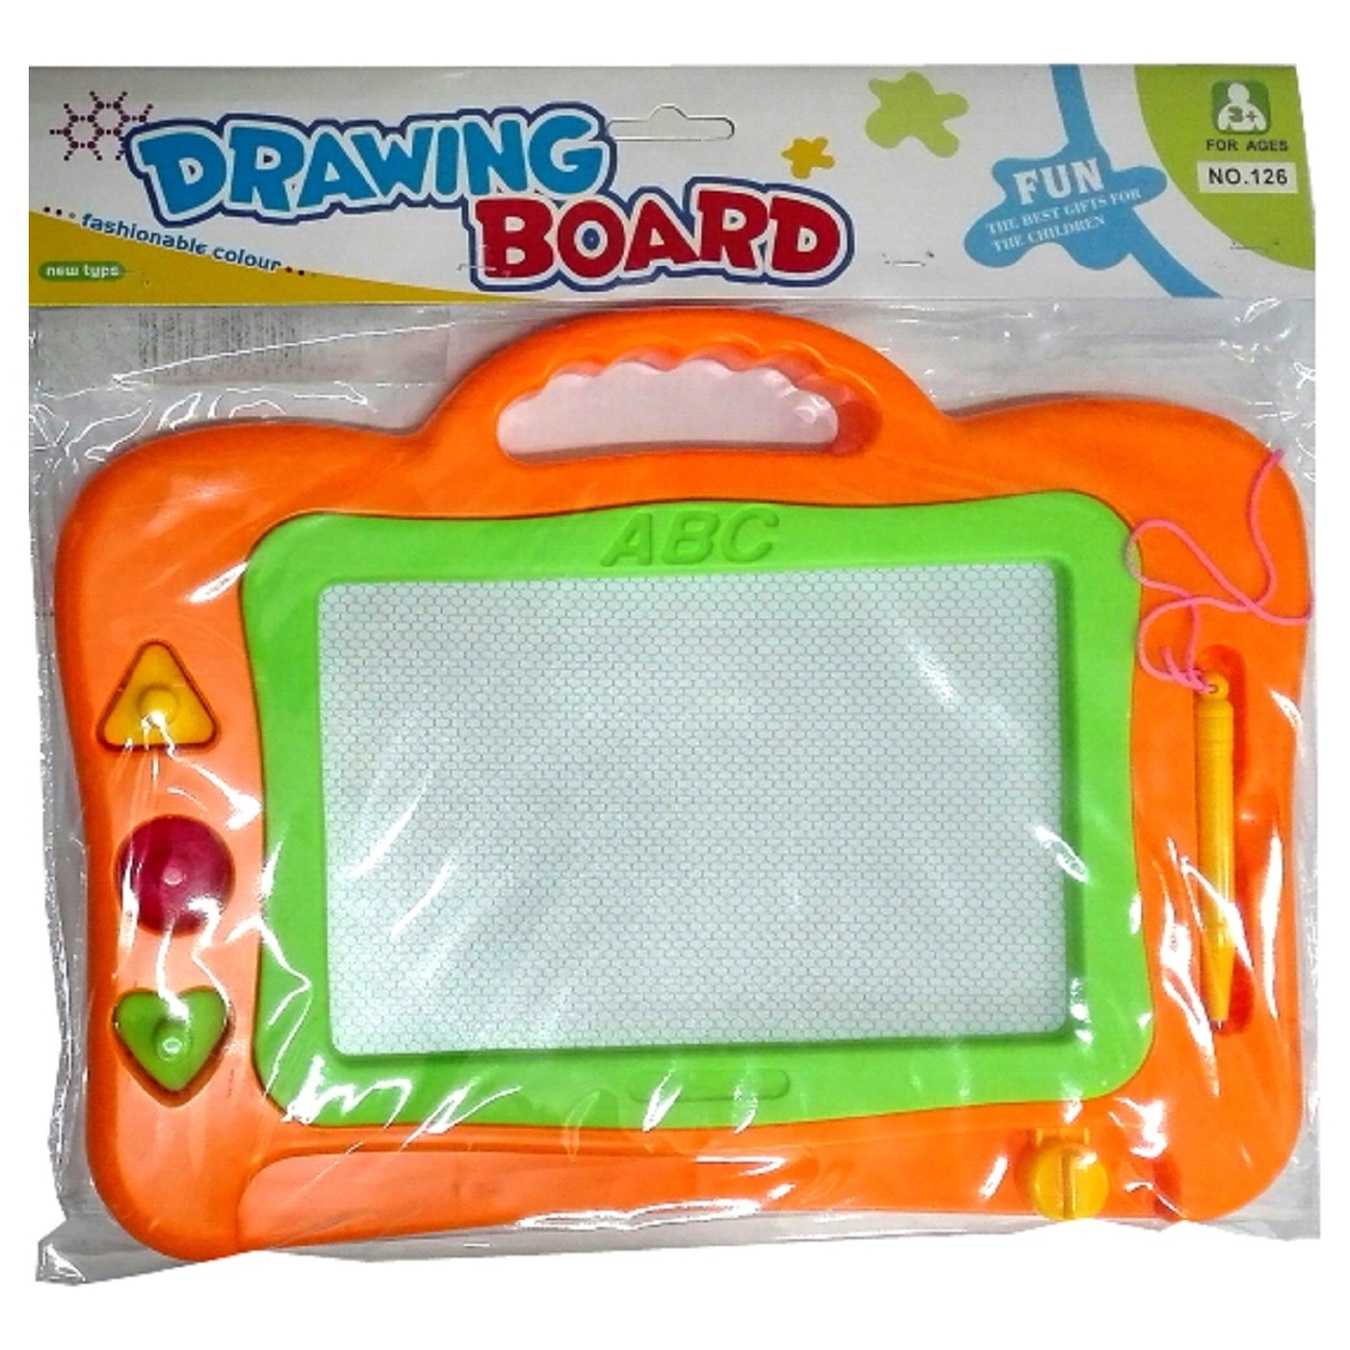 Children's tabletop drawing board game MAYA TOYS